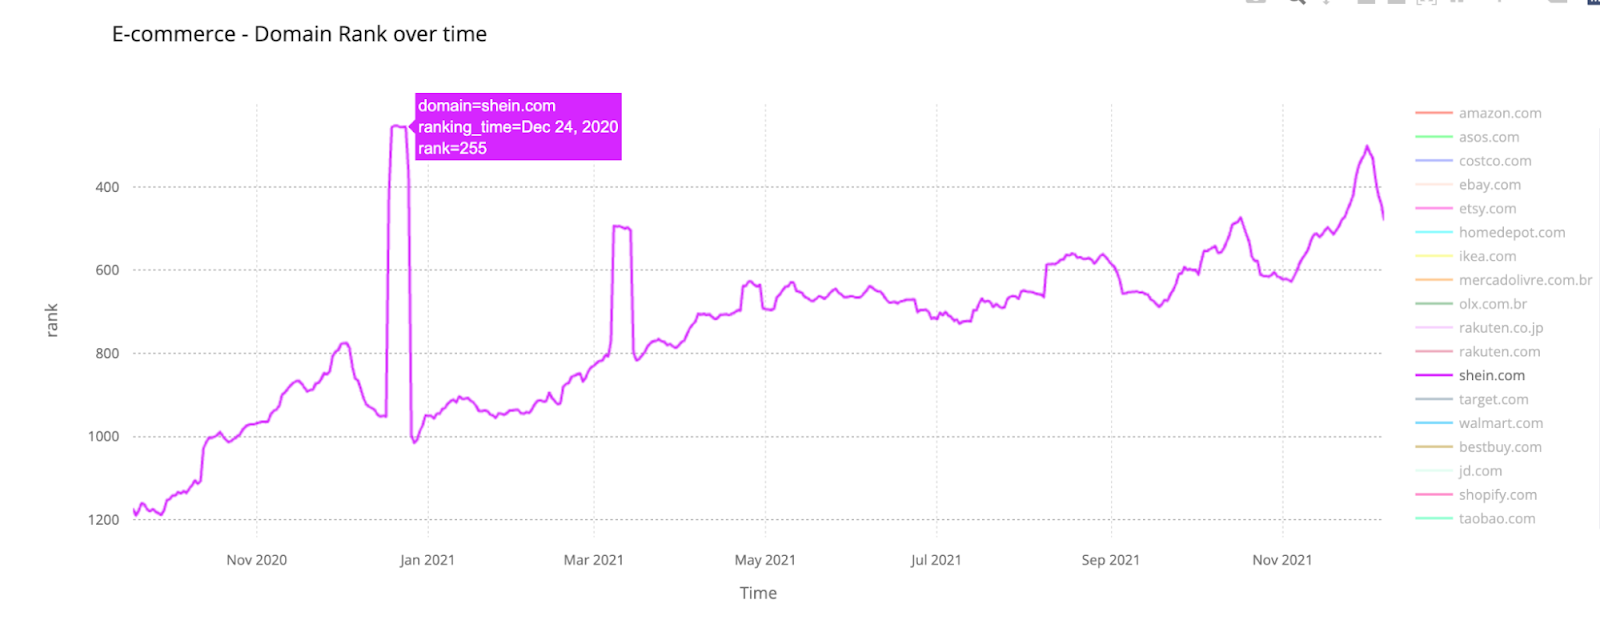 When we look to Shein.com we see that it peaked last Christmas and is on the rise since November 2021